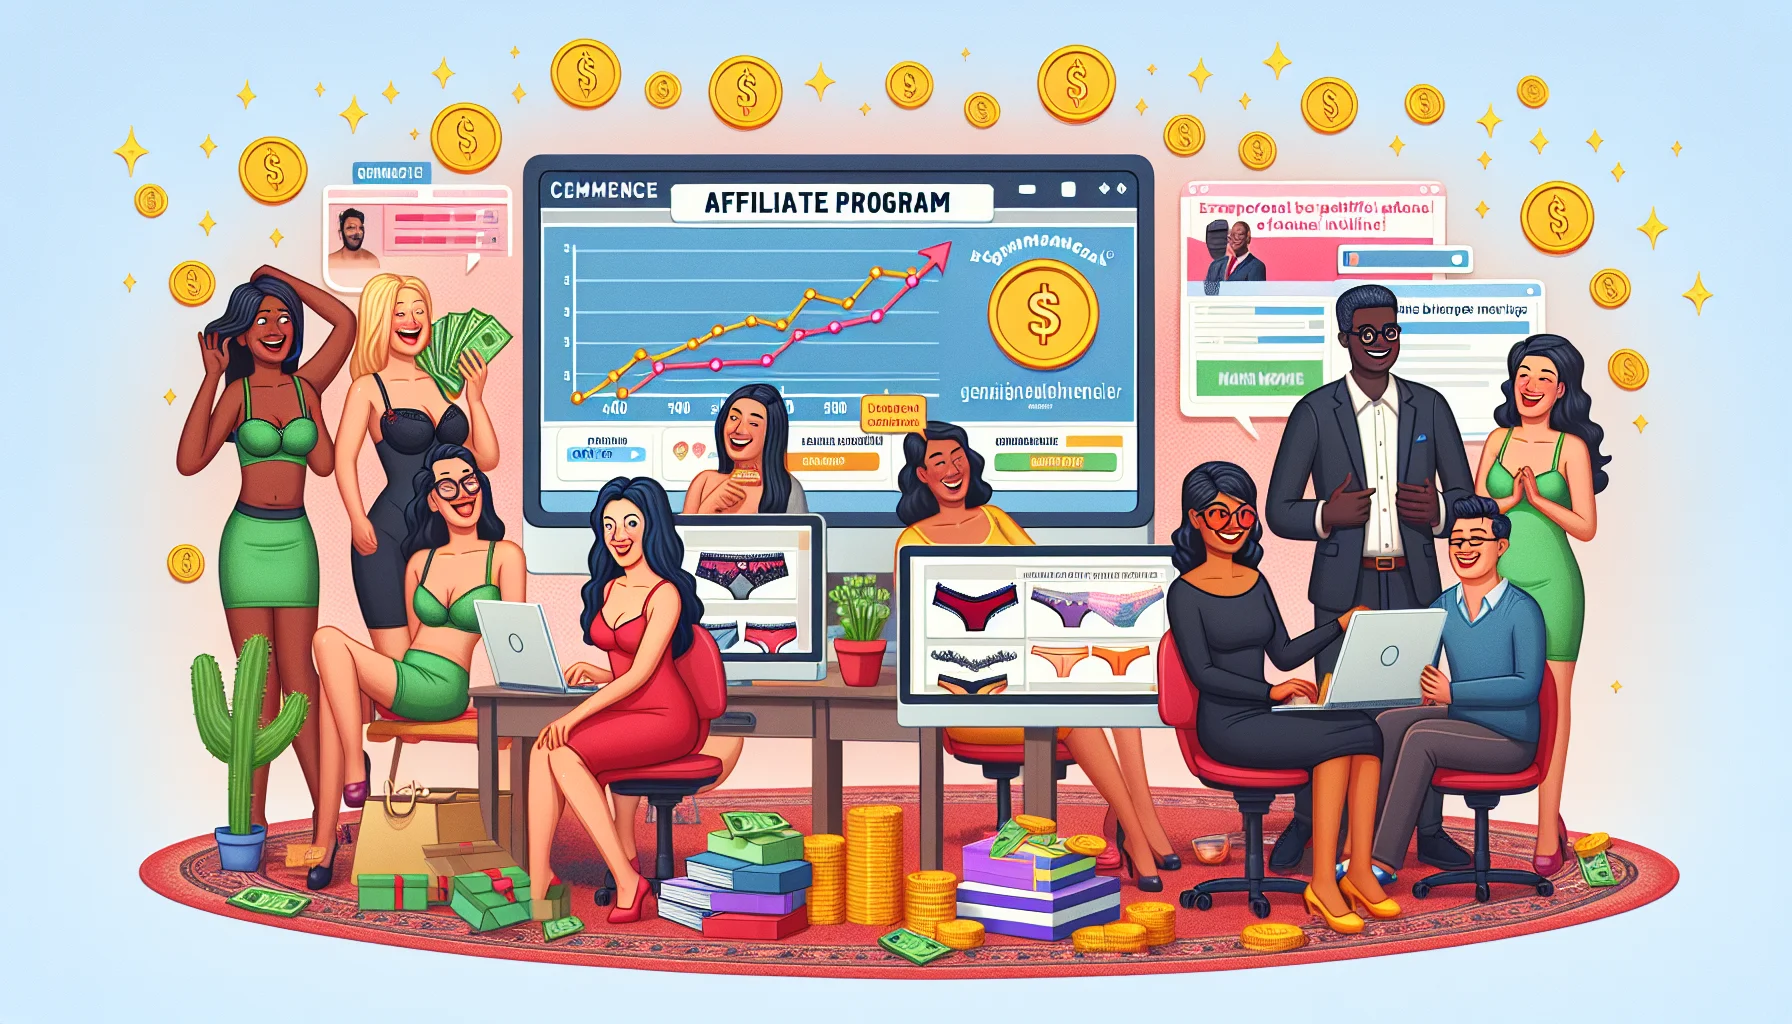 Create a humorous and realistic image depicting an affiliate program for a generic lingerie brand. The scene could include individuals of various genders, like a South Asian woman and a Black man, enthusiastically engaging in online activities such as tracking their income stats or promoting the products on social media. Please include elements associated with e-commerce and affiliate marketing - vibrant charts showing earnings growth, computers displaying the brand's webpage, digital coins, etc. The overall mood of the image should be enticing, conveying the excitement and potential profitability of making money online in a respectfully humorous way.